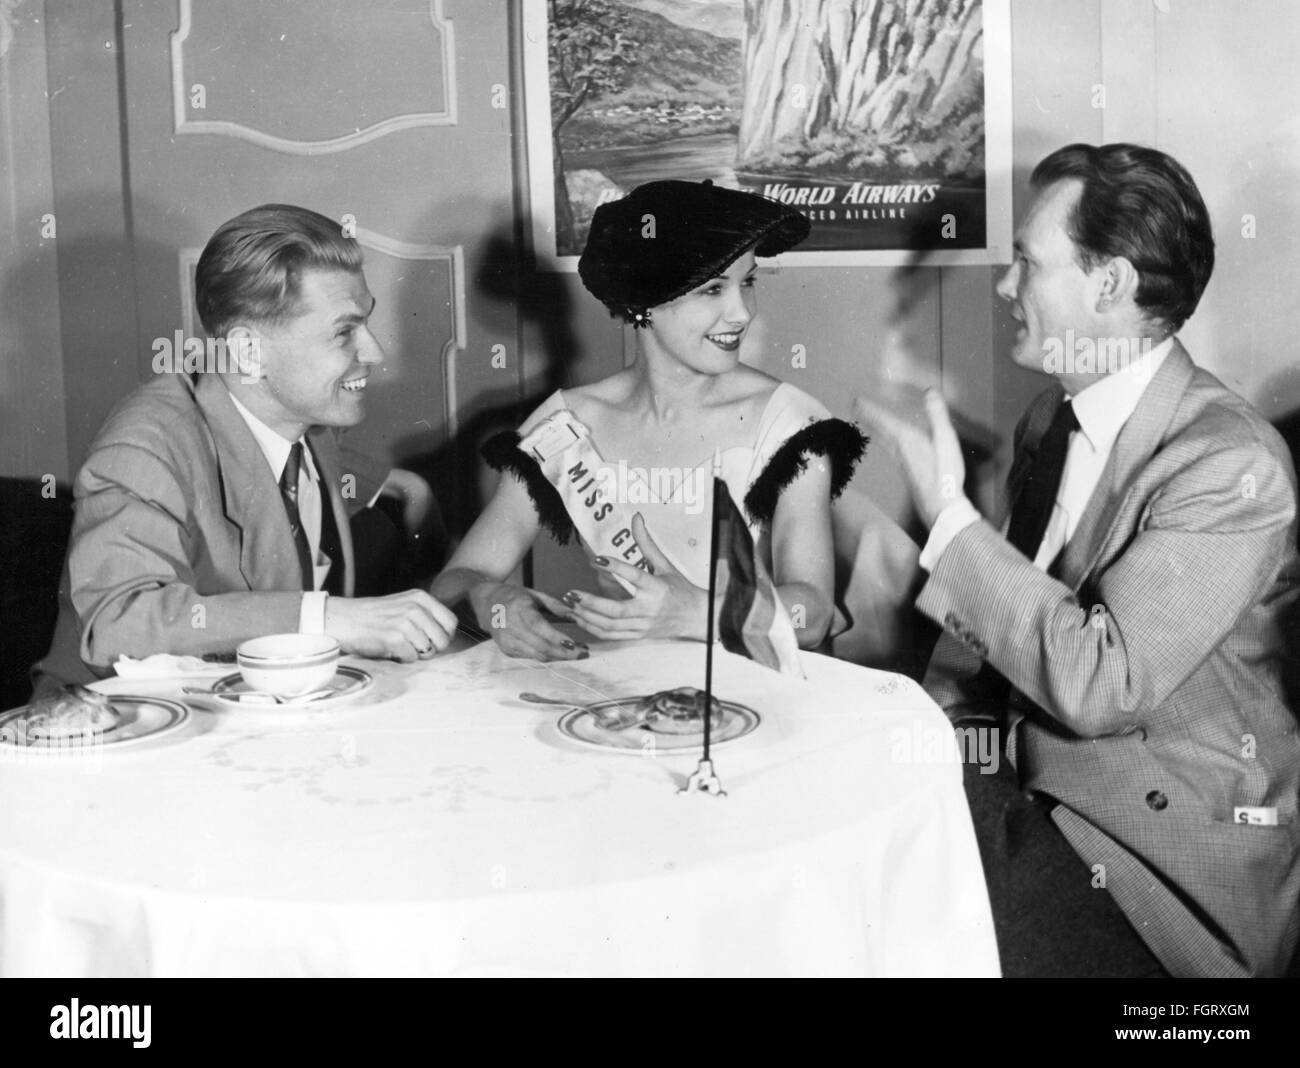 people,women,beauty pageants,Miss Universe 1952,Miss Germany Renate Hoy,half length,with Jochen Grossmann,giving interview,Hotel Plaza,New York,19.6.1952,20th century,1950s,50s,USA,United States of America,beauty contest,beauty contests,beauty queen,beauty queens,beauty,beauties,belle,belles,sitting,sit,clothes,outfit,outfits,hat,hats,sash,sashes,smiles,smiling,smile,birth name: Anita Huy,actress,table,tables,conversation,conversations,talks,talking,talk,journalist,journalists,reporter,reporters,press conference,,Additional-Rights-Clearences-Not Available Stock Photo